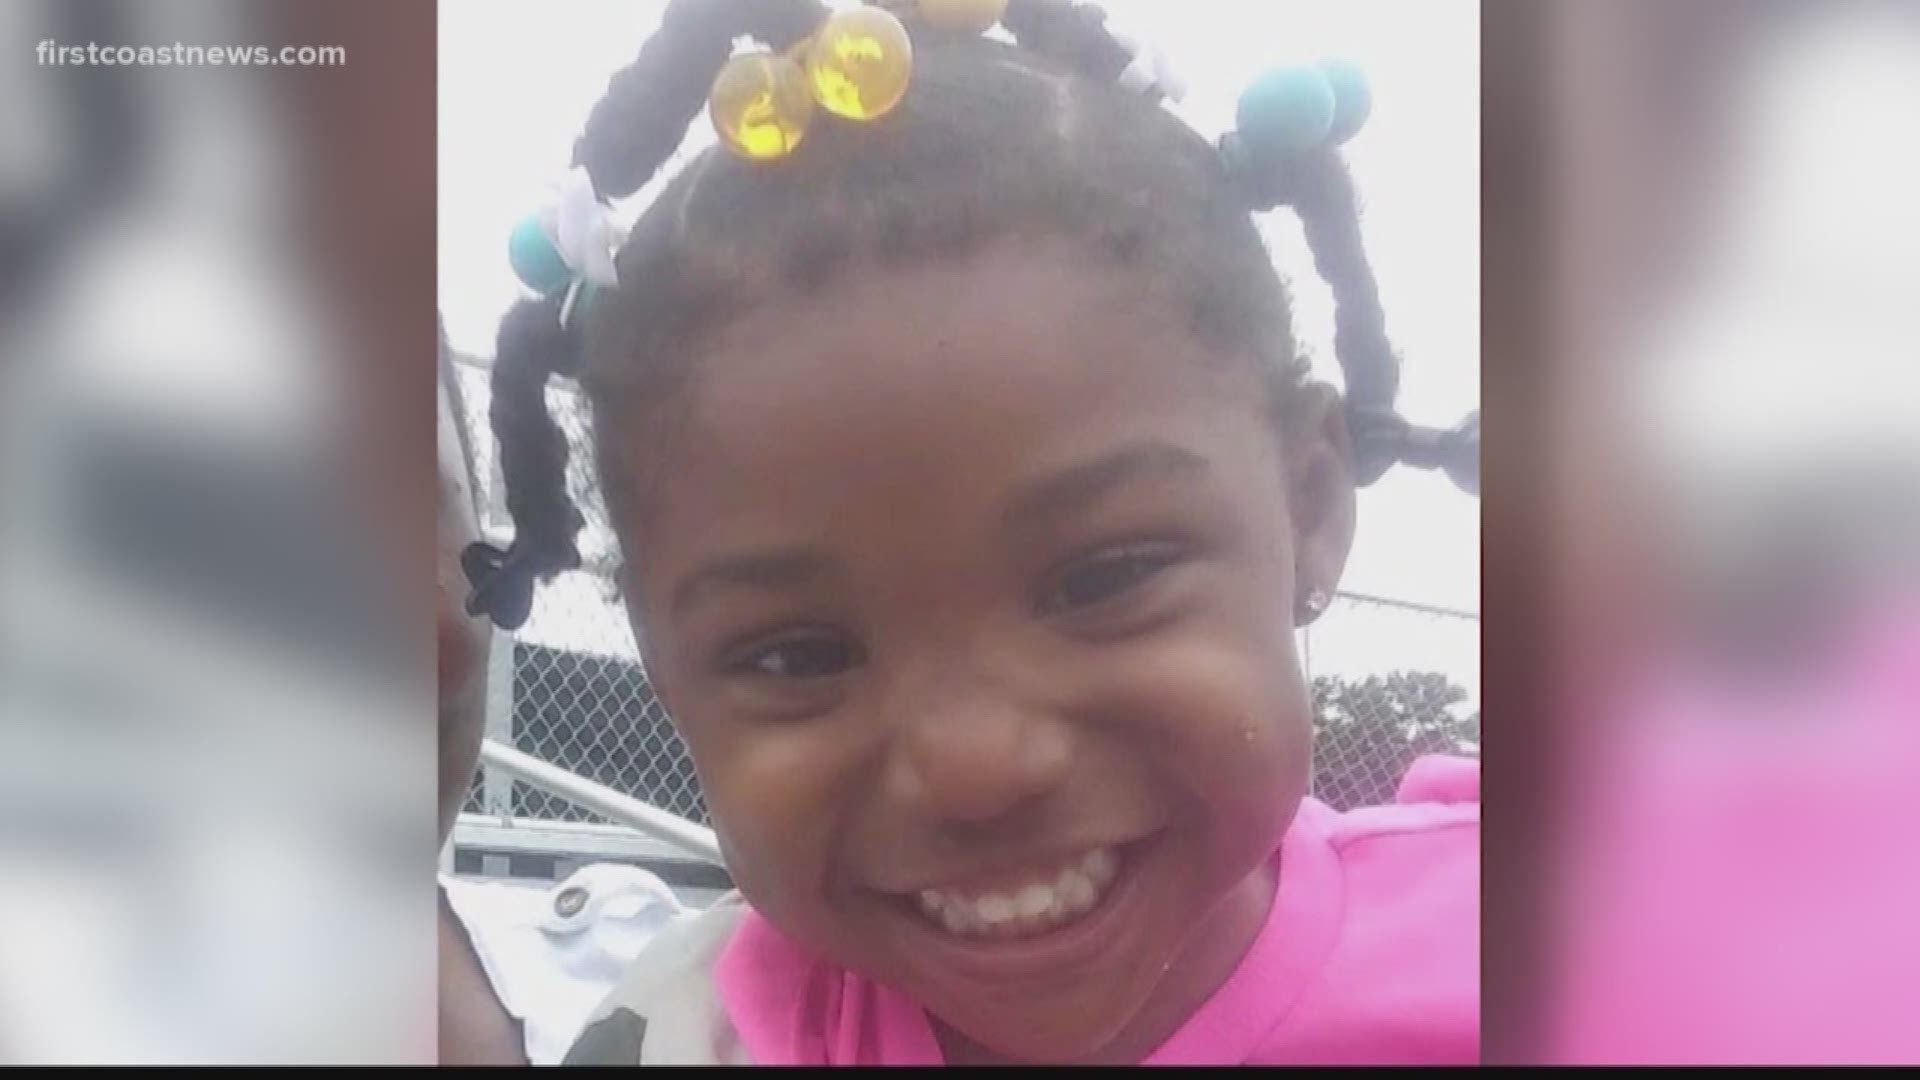 As the search for missing 5-year-old Taylor Rose Williams continues, the case is beginning to mirror that of a missing Alabama girl.